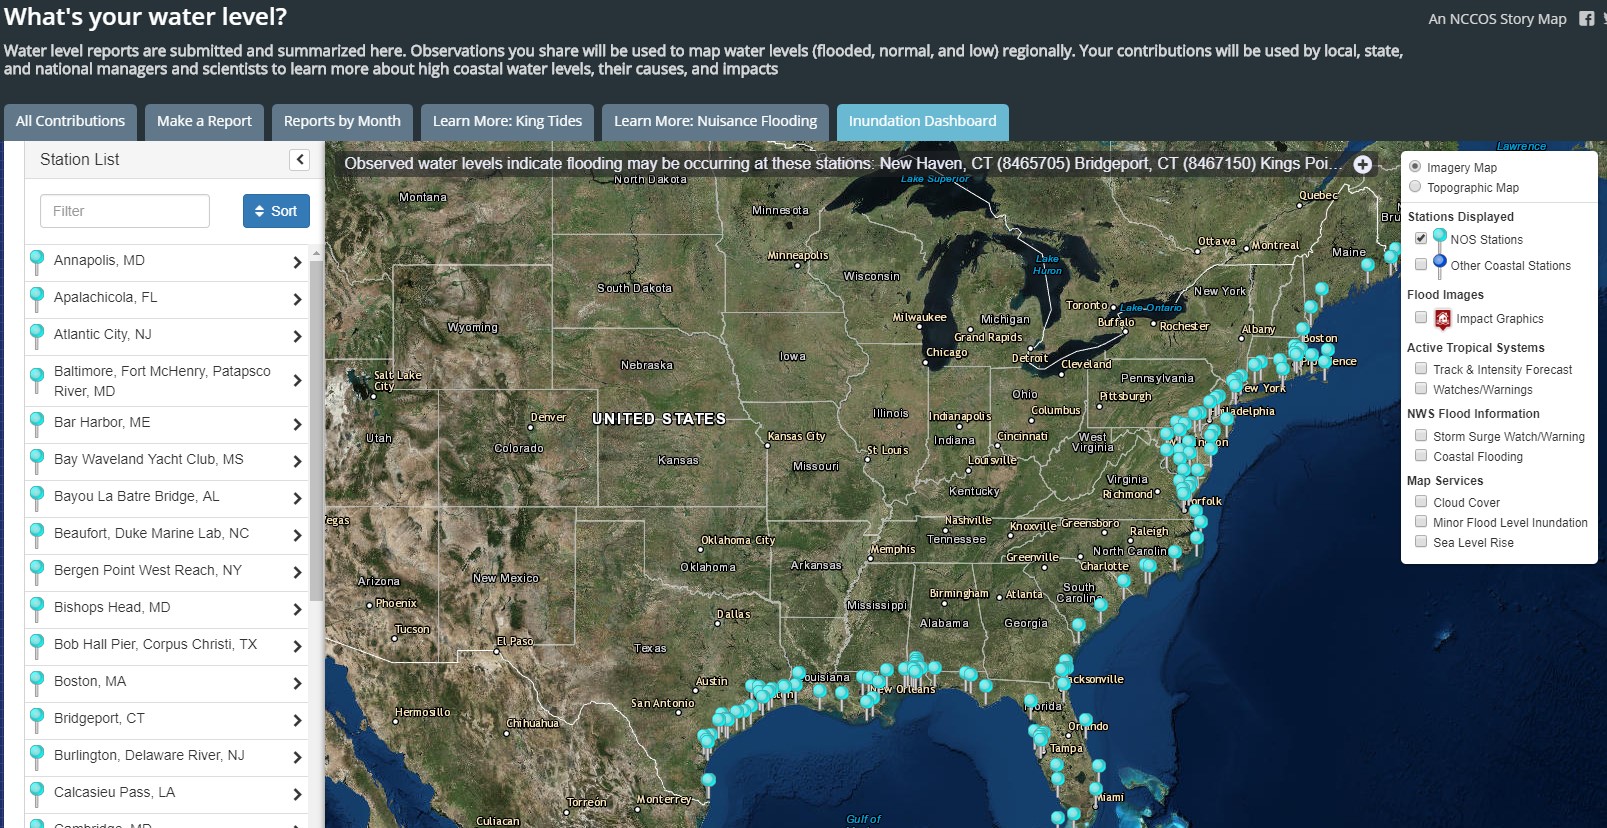 A screenshot of the tool, Citizen Science Water Level Application, being used.